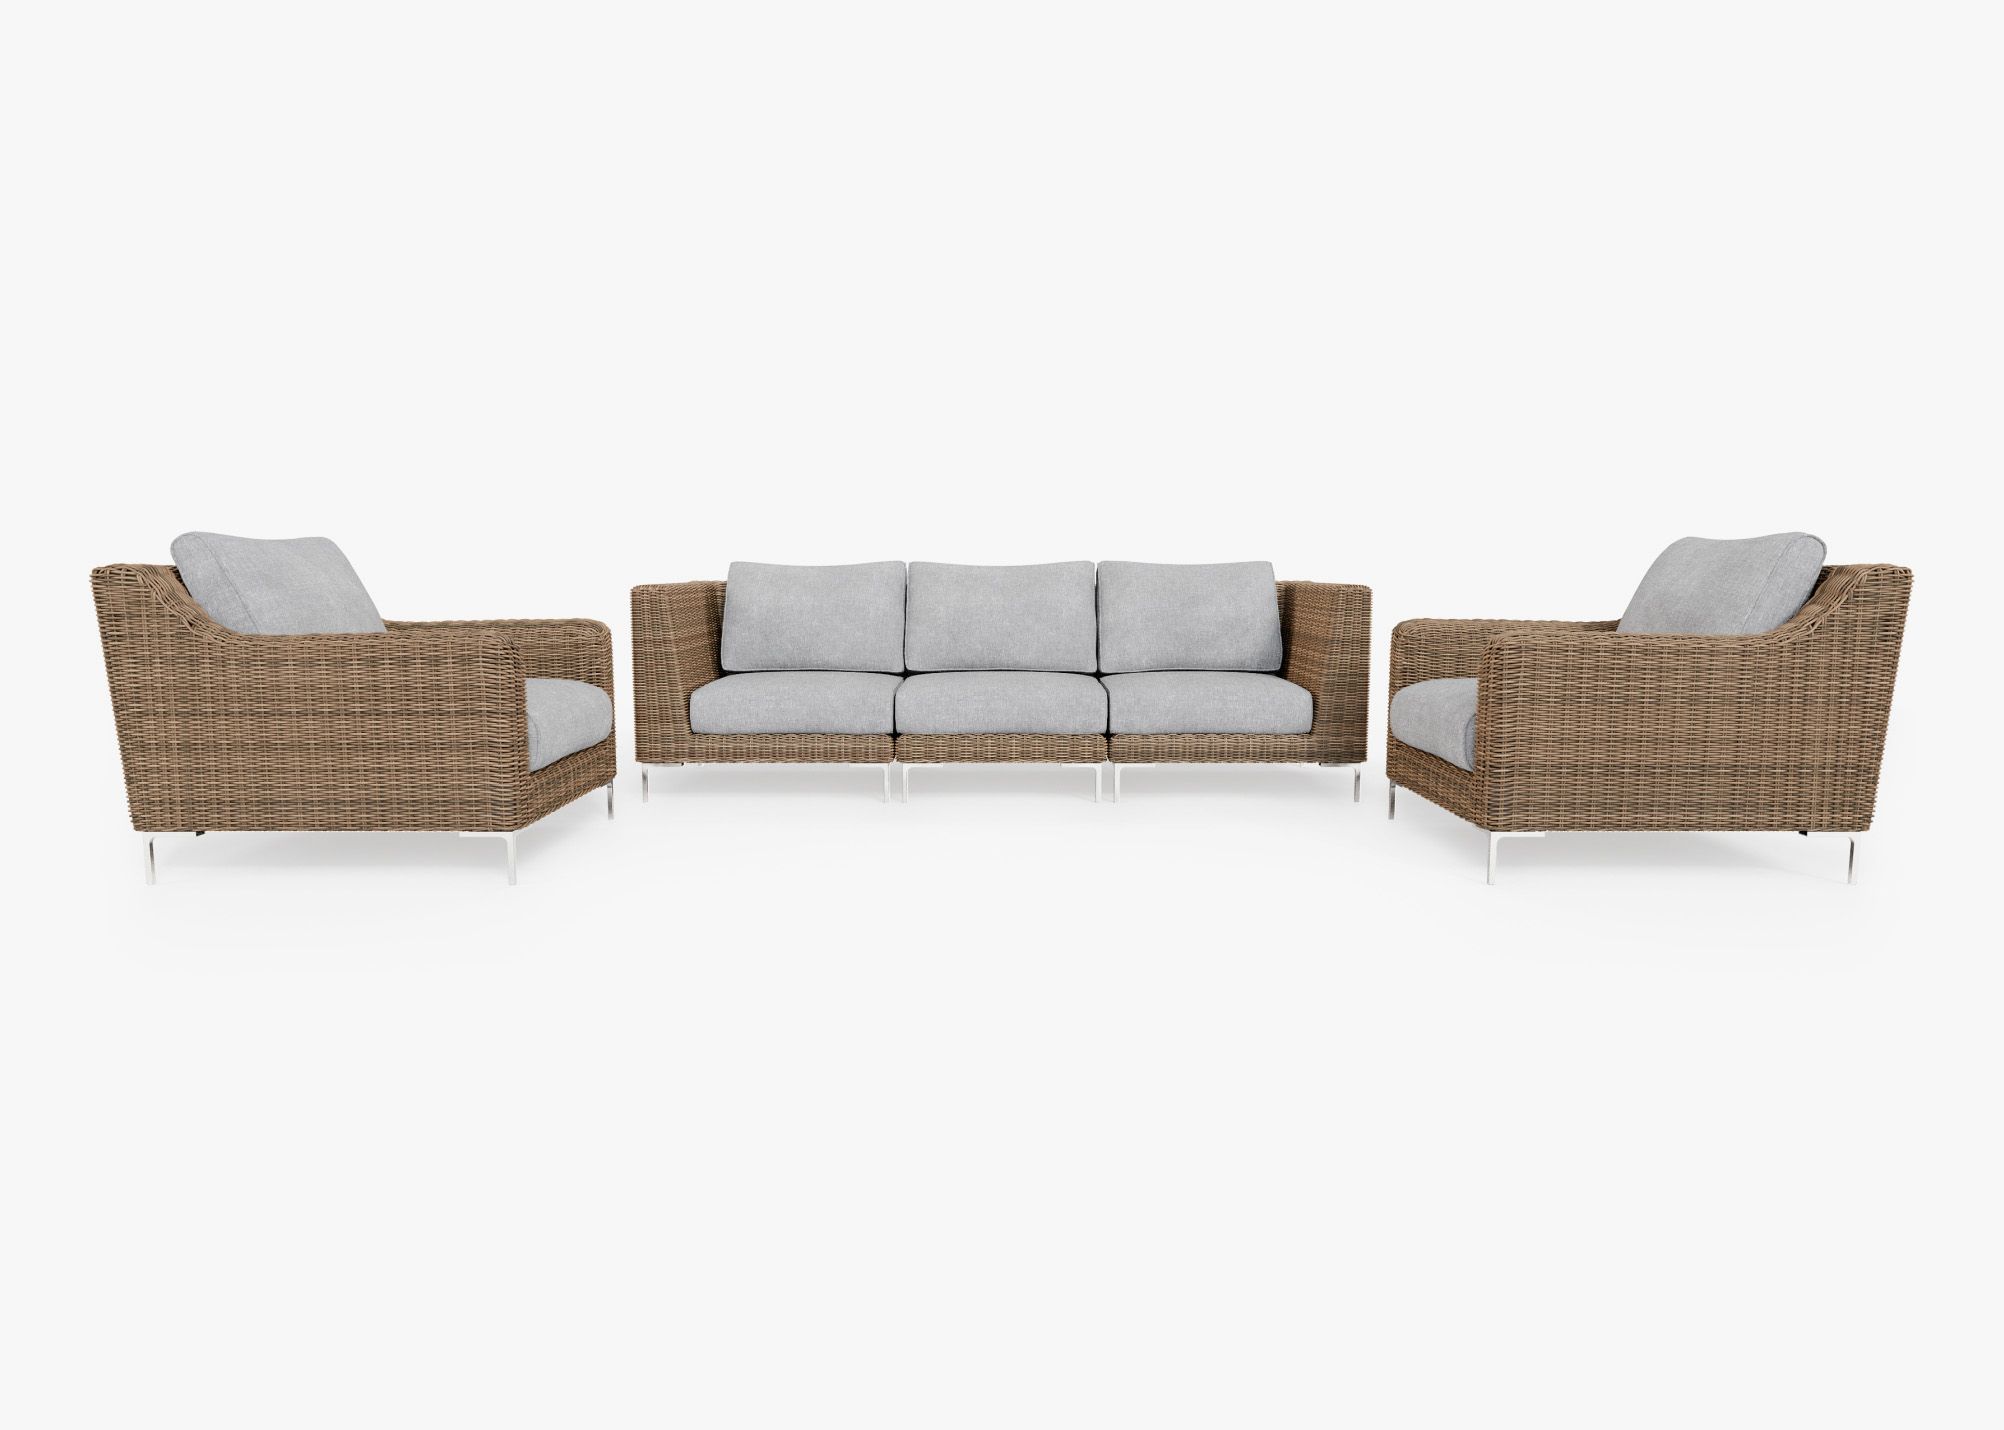 Outer  Modular Outdoor Brown Wicker Furniture